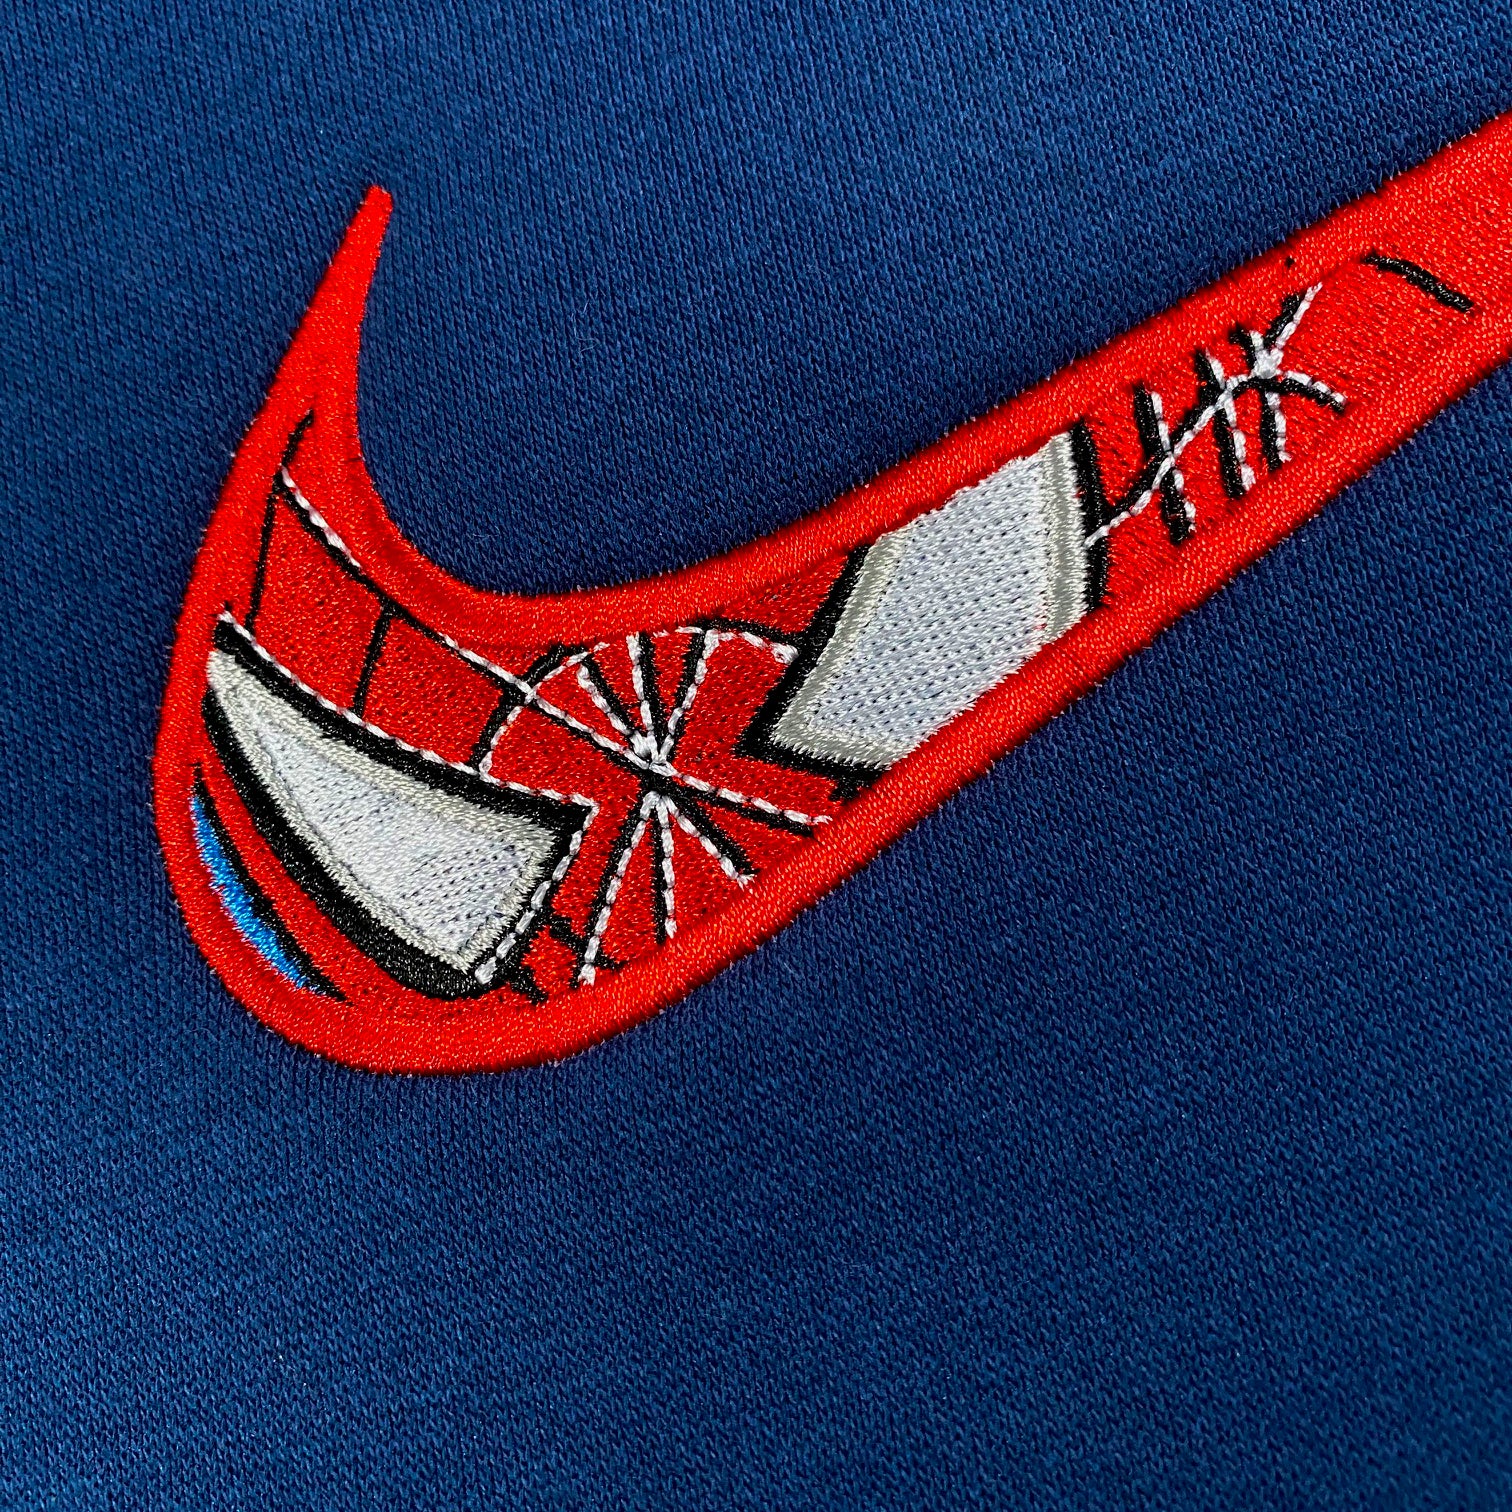 LIMITED Spiderman EMBROIDERED ANIME HOODIE